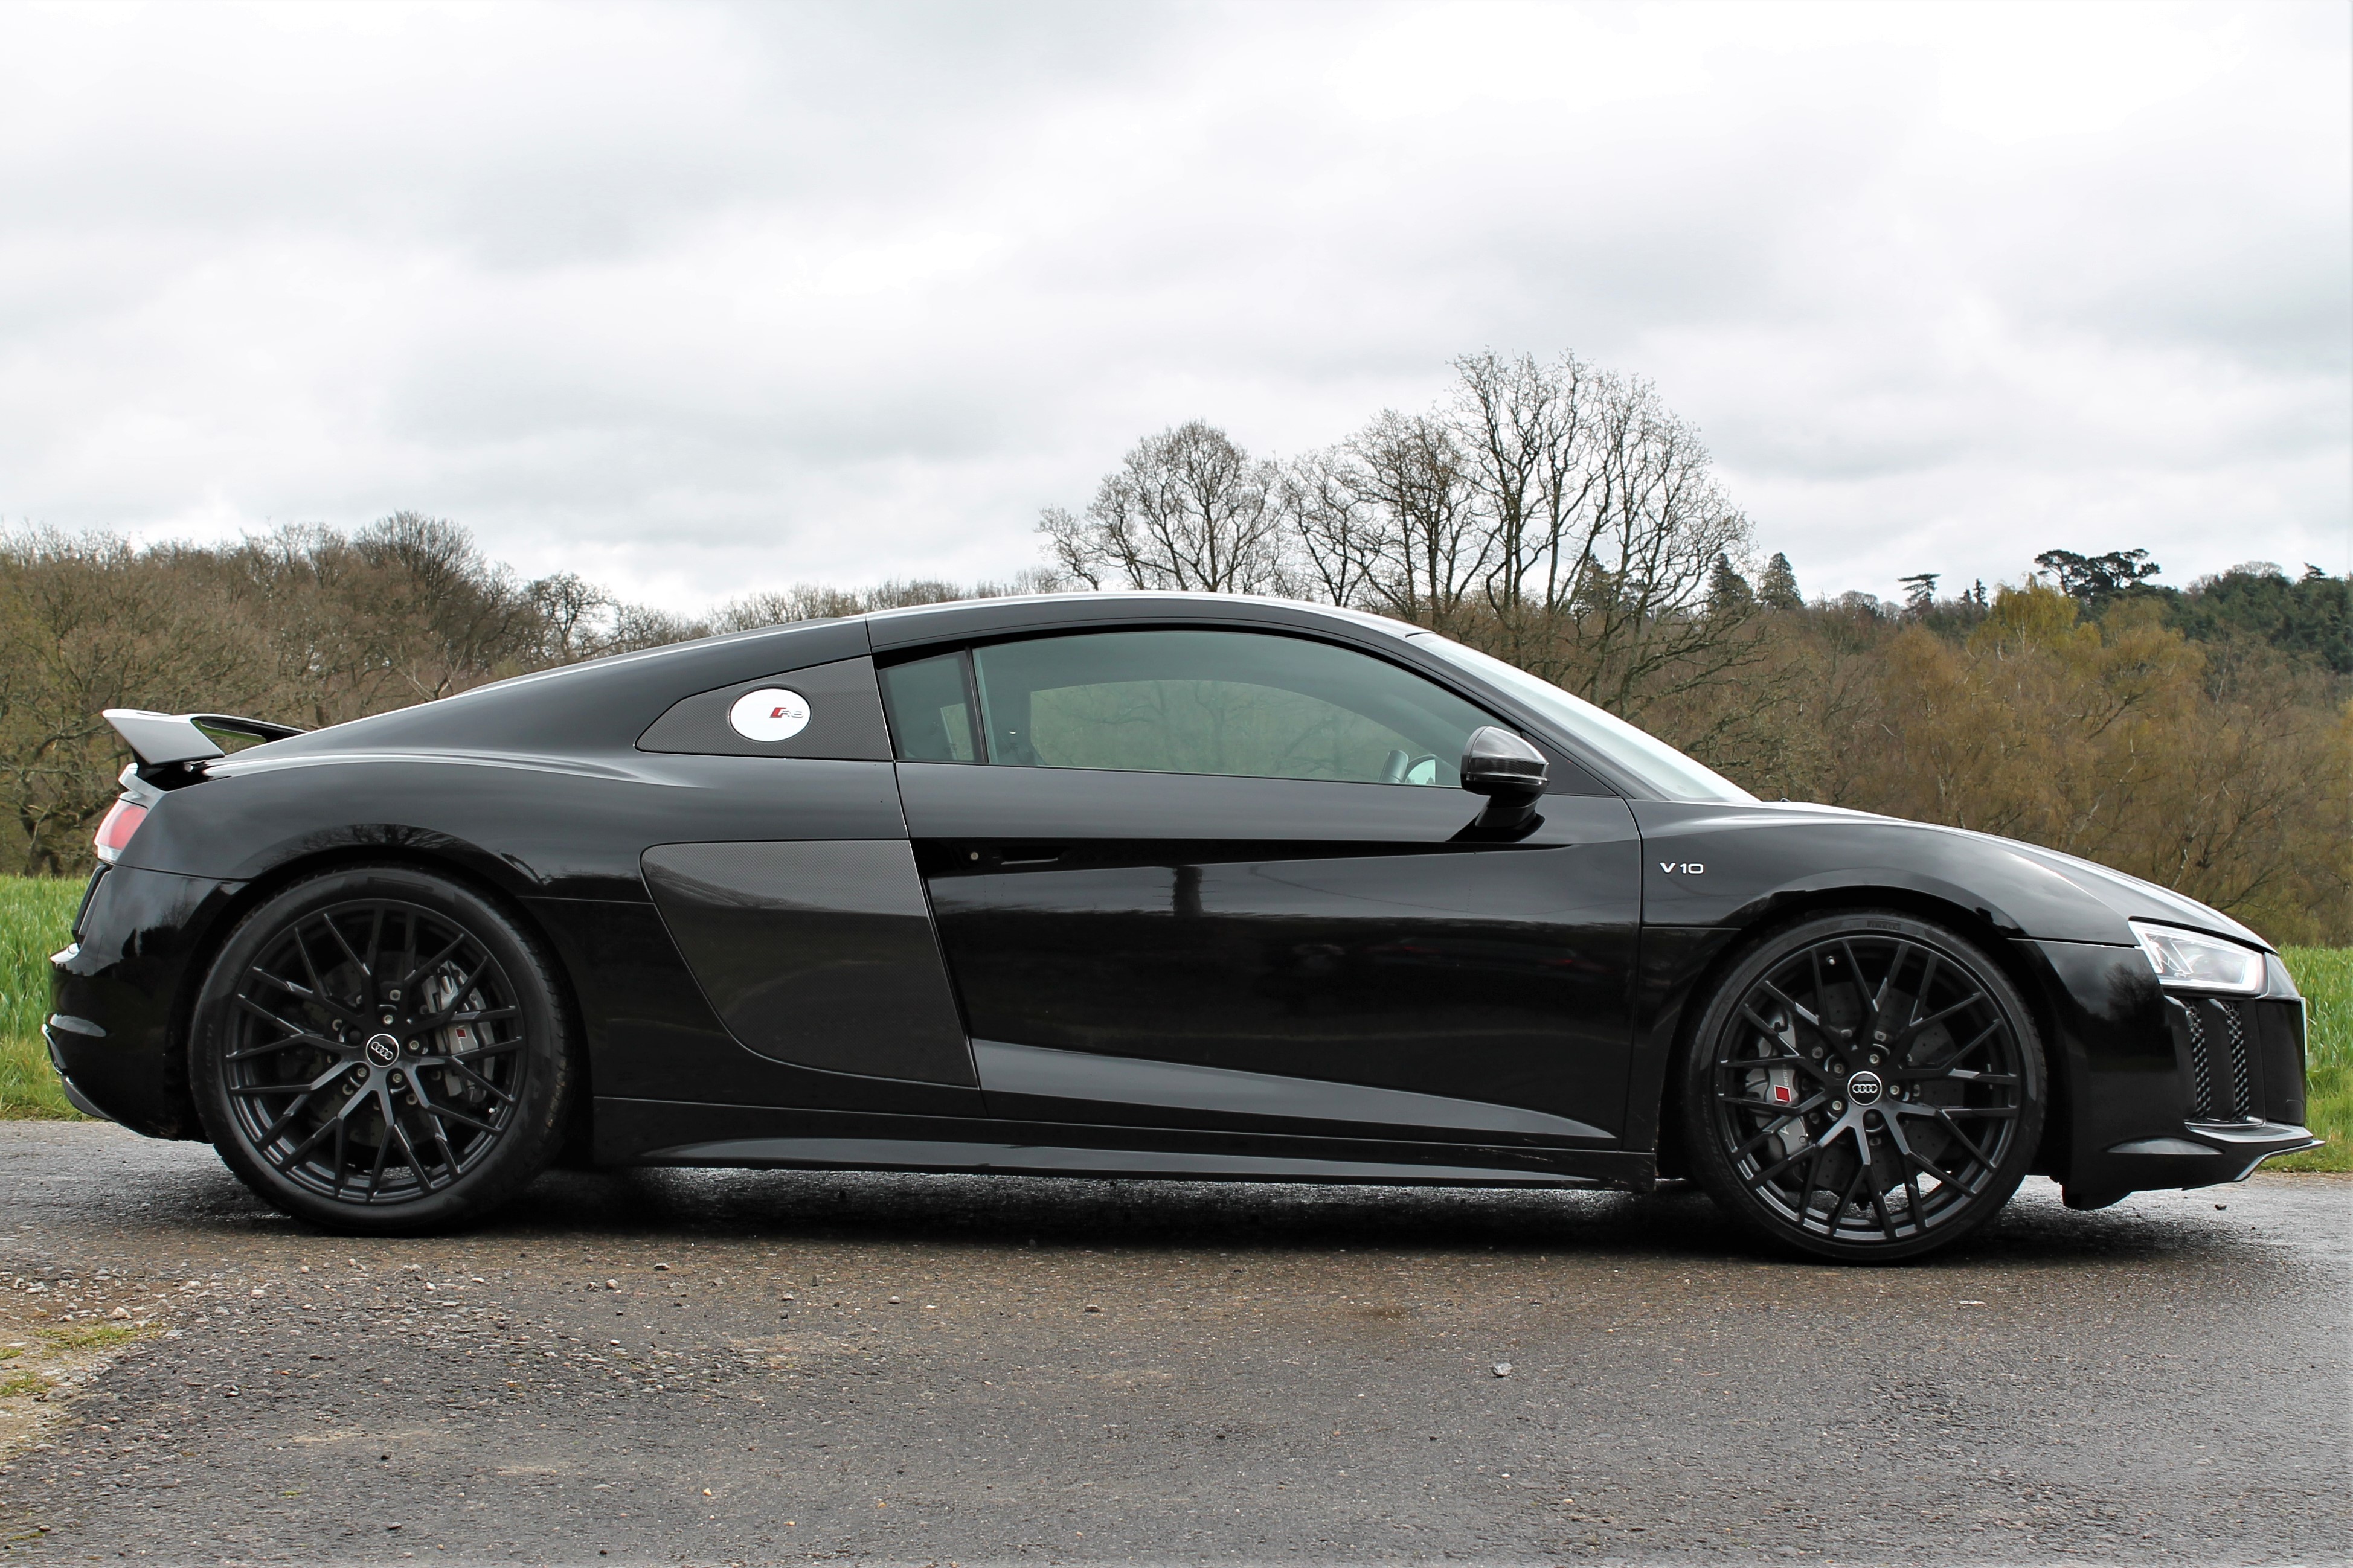 Audi R8 Coupe exterior specifications